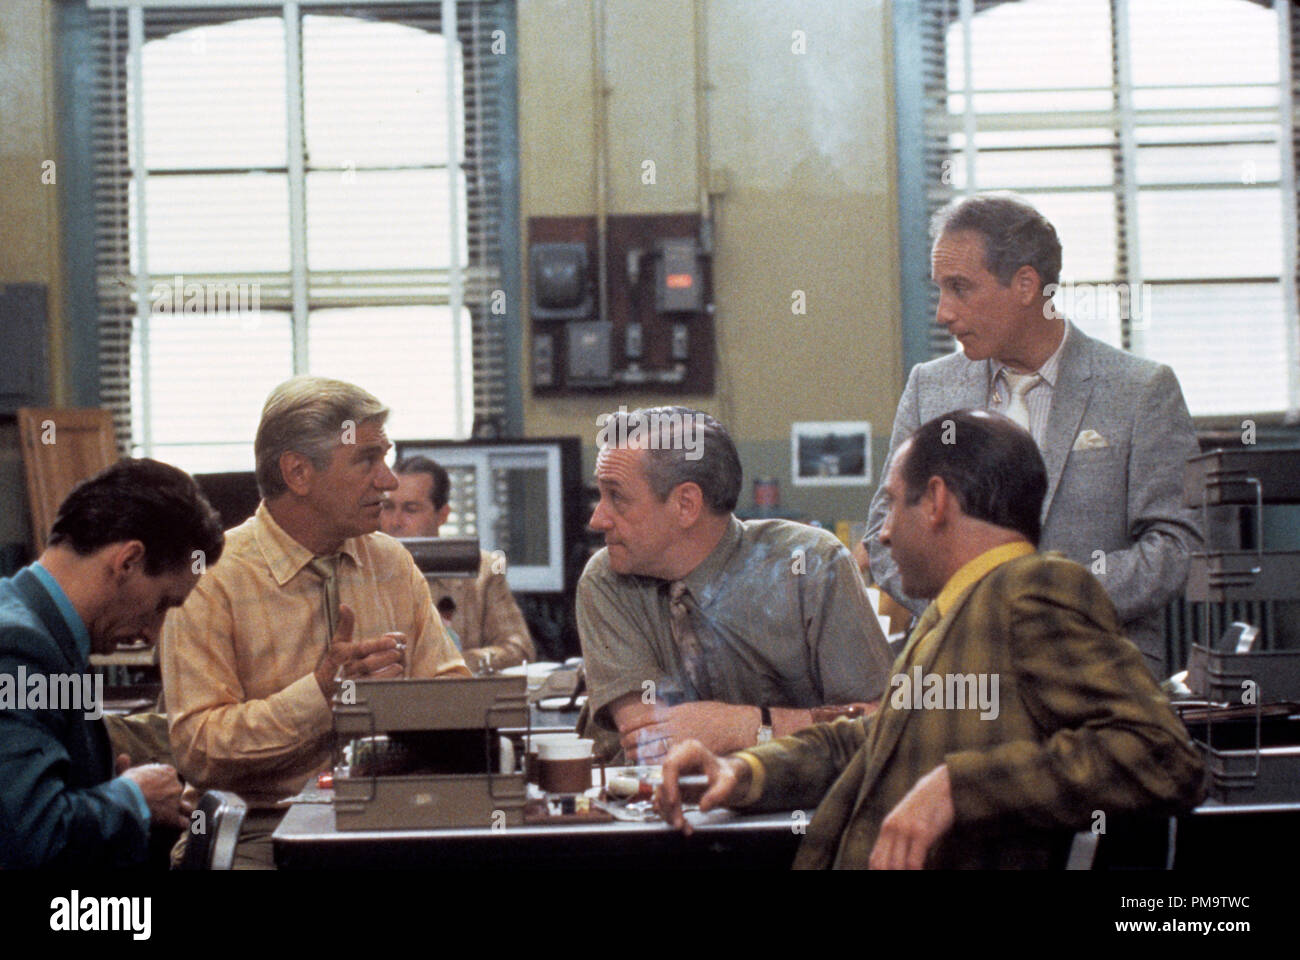 Studio Publicity Still from 'Tin Men' Seymour Cassel, John Mahoney, Richard Dreyfuss © 1987 Touchstone Pictures   All Rights Reserved   File Reference # 31697012THA  For Editorial Use Only Stock Photo